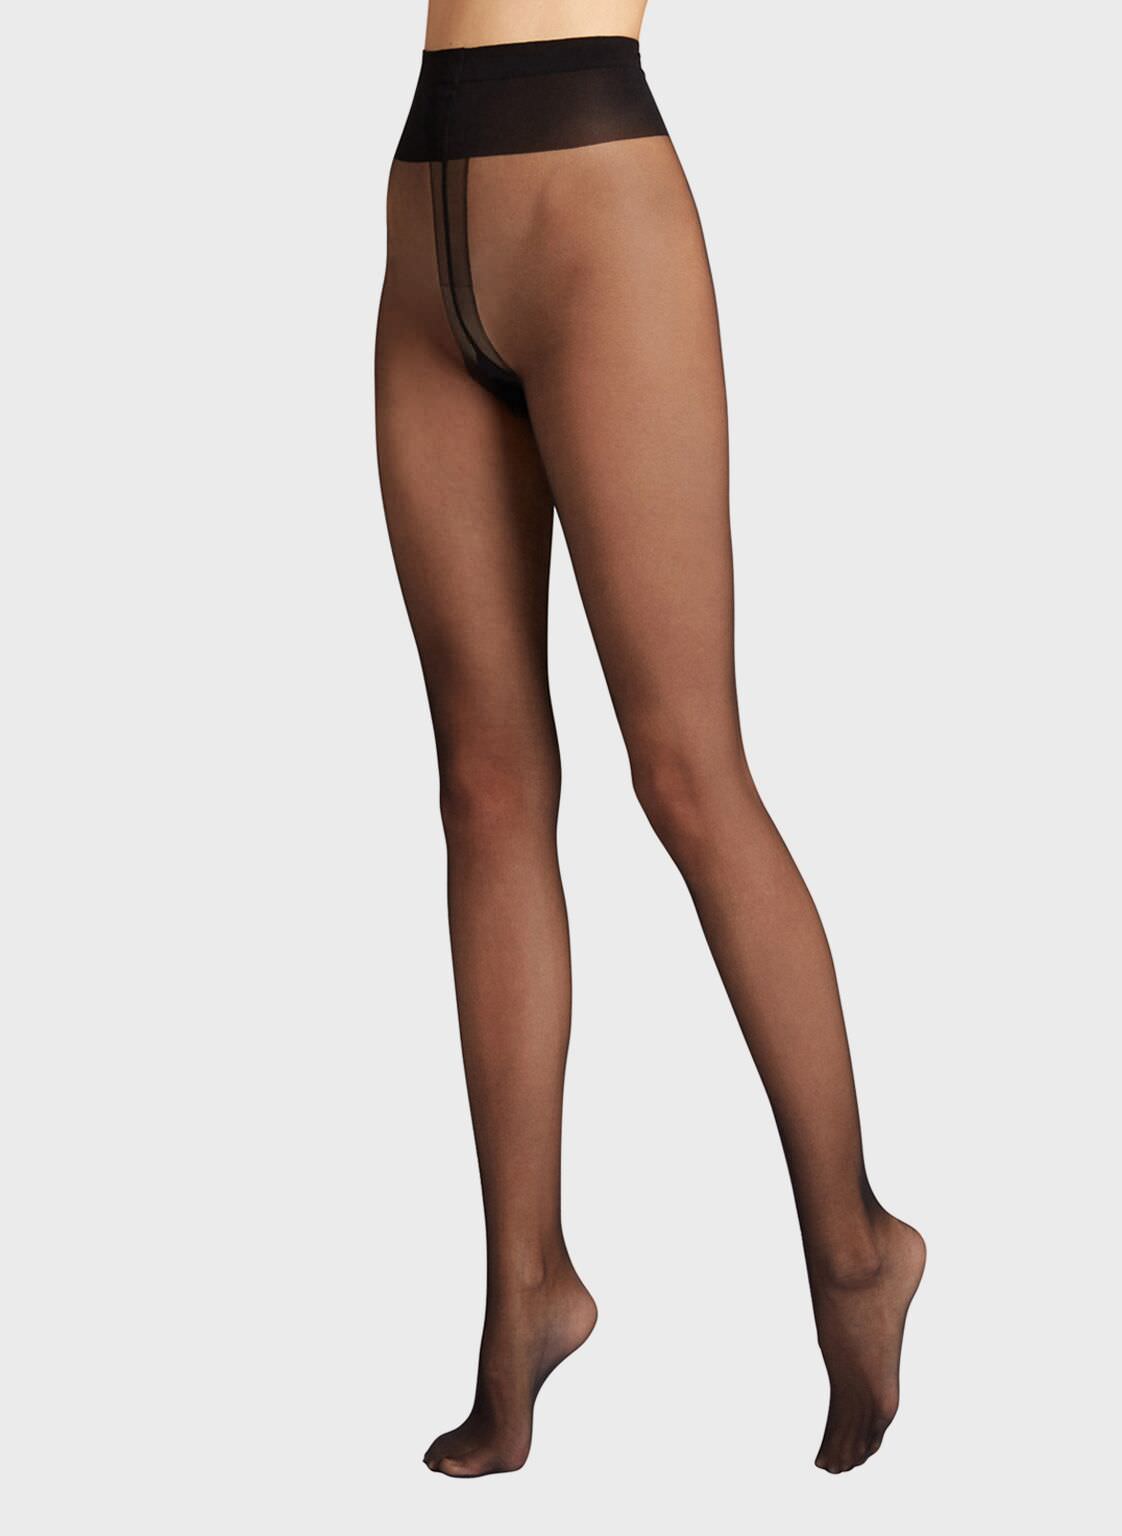 Wolford Body Size Chart - The Hosiery Box